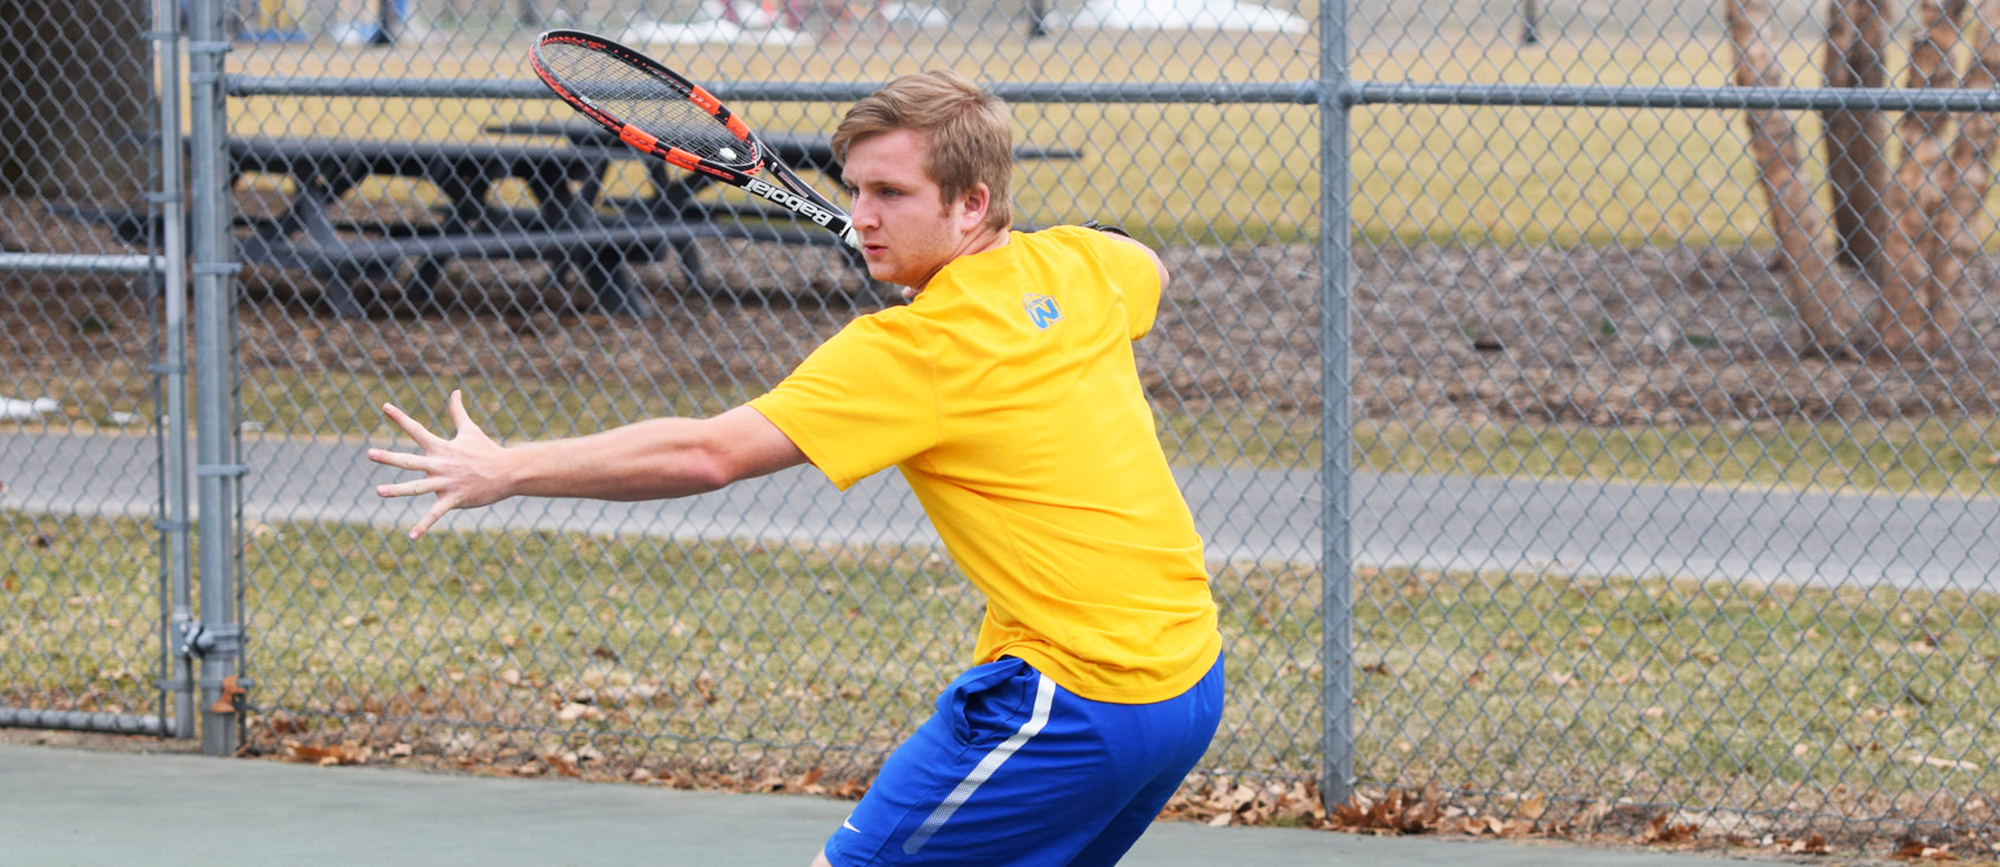 Freshman Max Gordon picked up wins at No. 2 doubles and No. 3 singles in Western New England's 9-0 victory at MCLA on Friday. (Photo by Rachael Margossian)